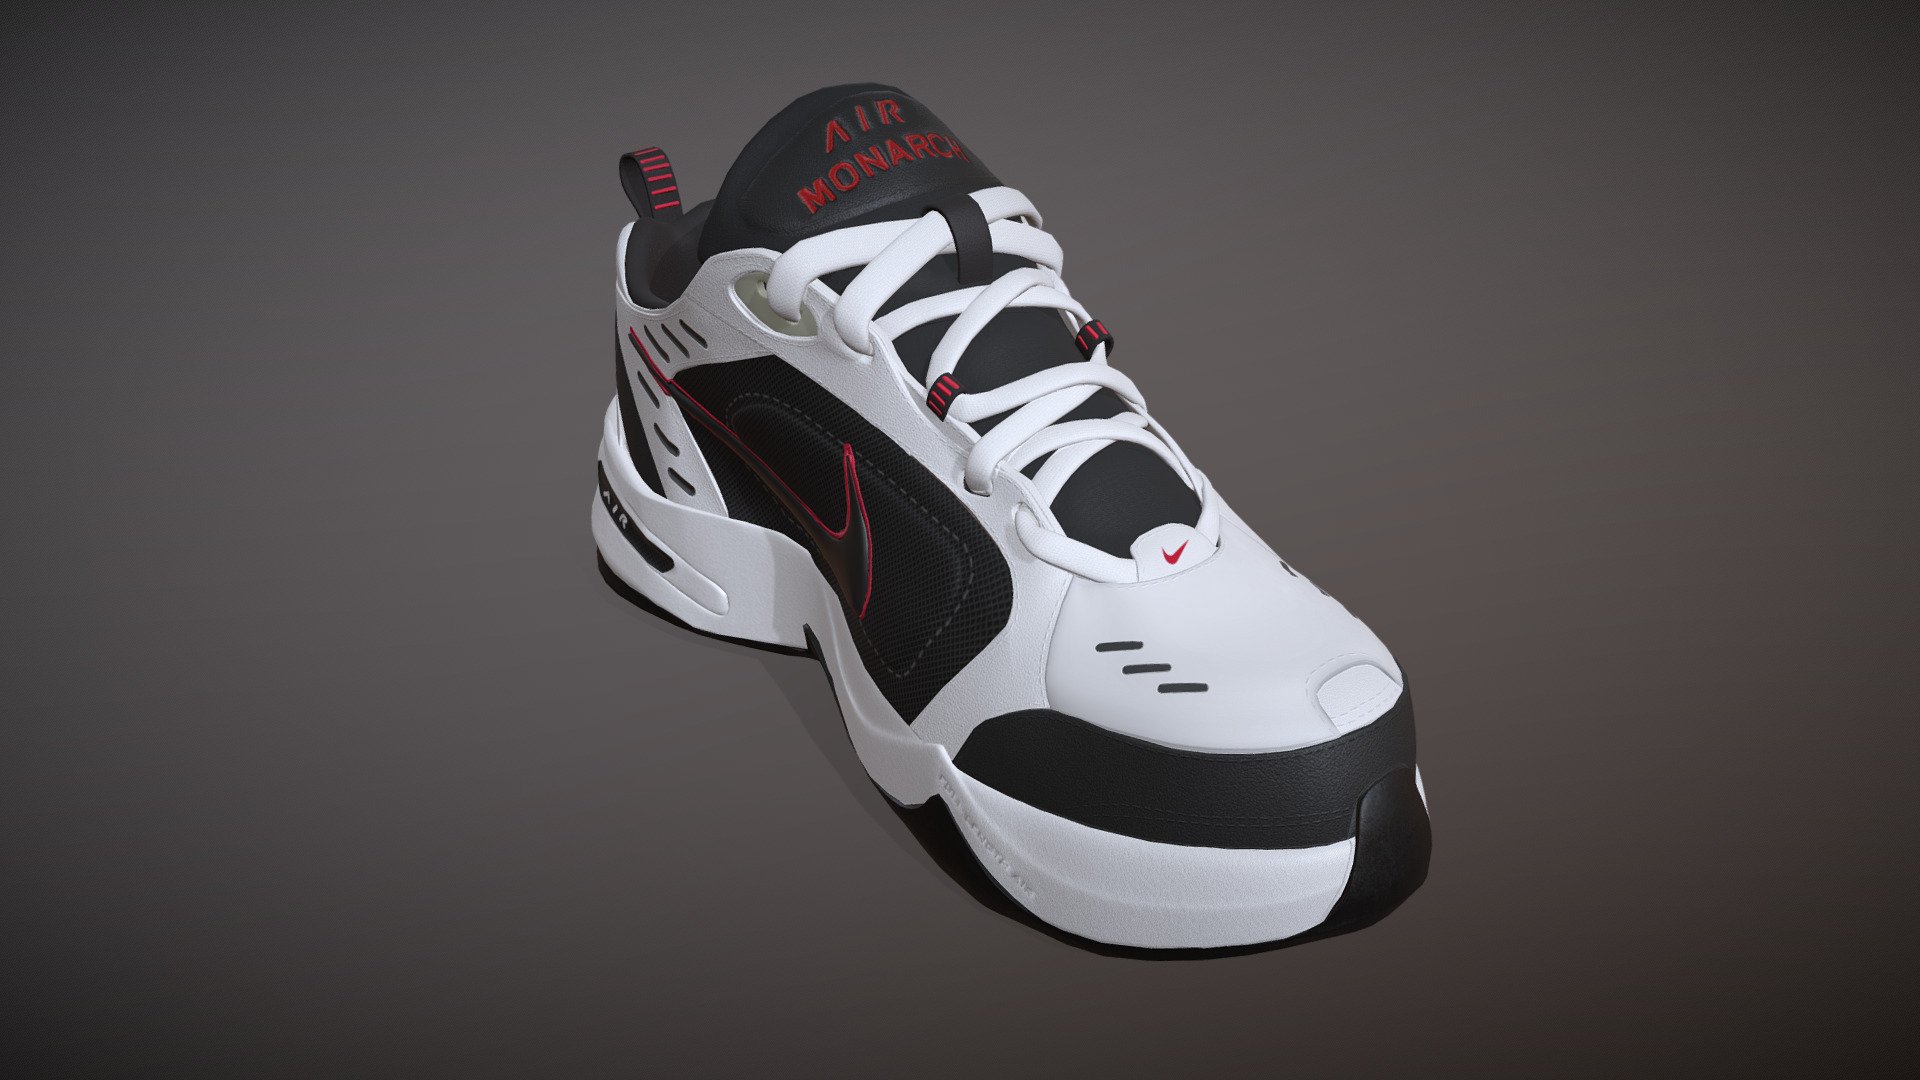 Nike Air IV 3D model by astvictor92 (@astvictor92) [2c6c959]